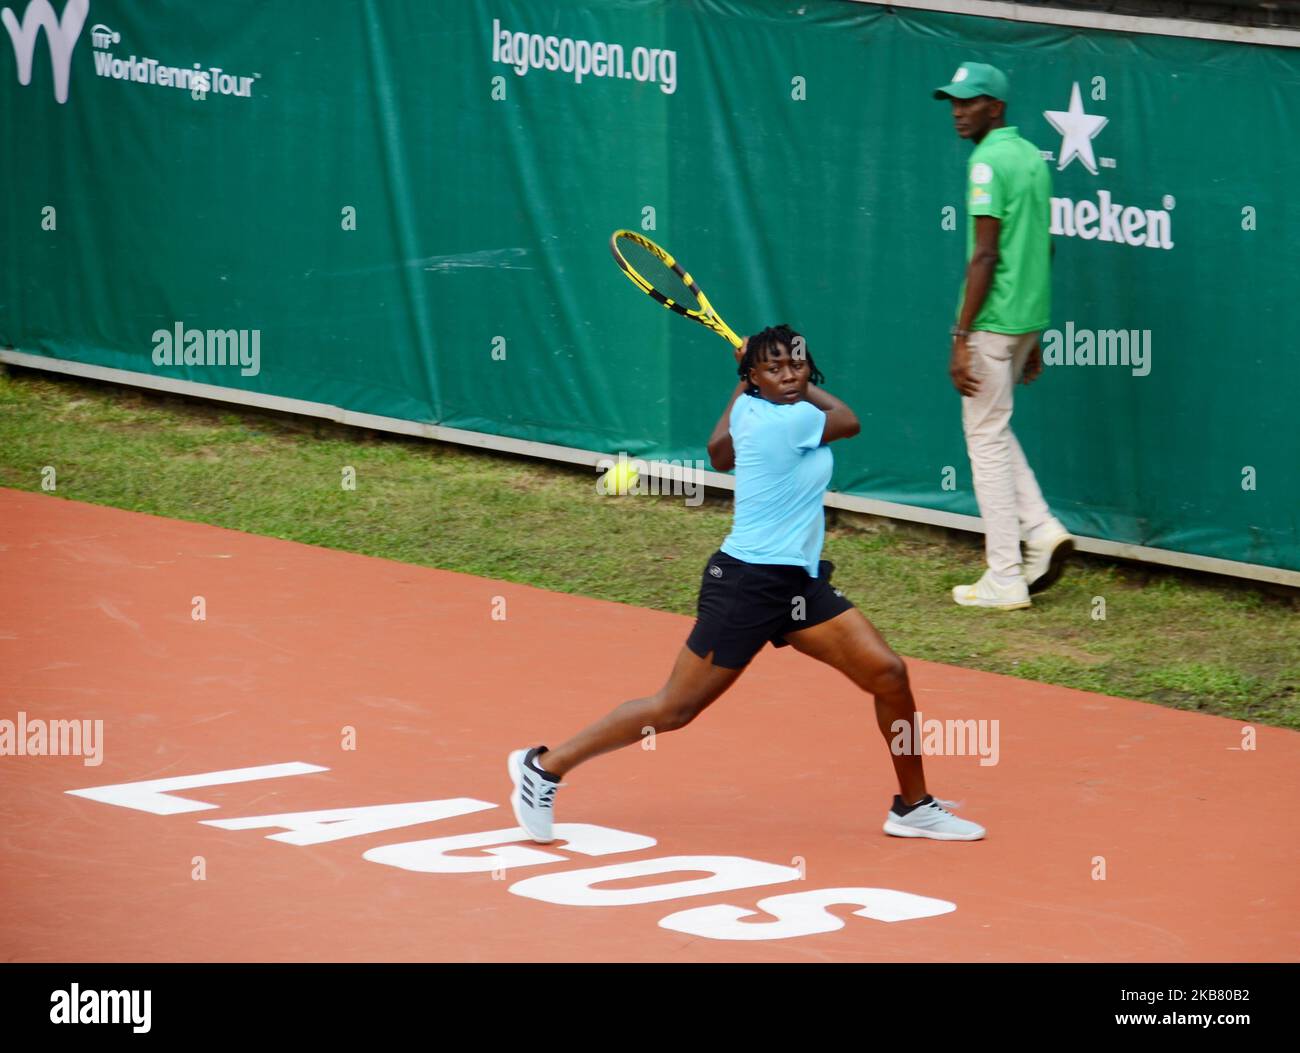 Peace Peace Udoh (NGA) plays against Blessing Samuel (NGA) during their 1R Qualifying match at Lagos Open 2019 on 7th October 2019 in Lagos, Nigeria. (Photo by Olukayode Jaiyeola/NurPhoto) Stock Photo